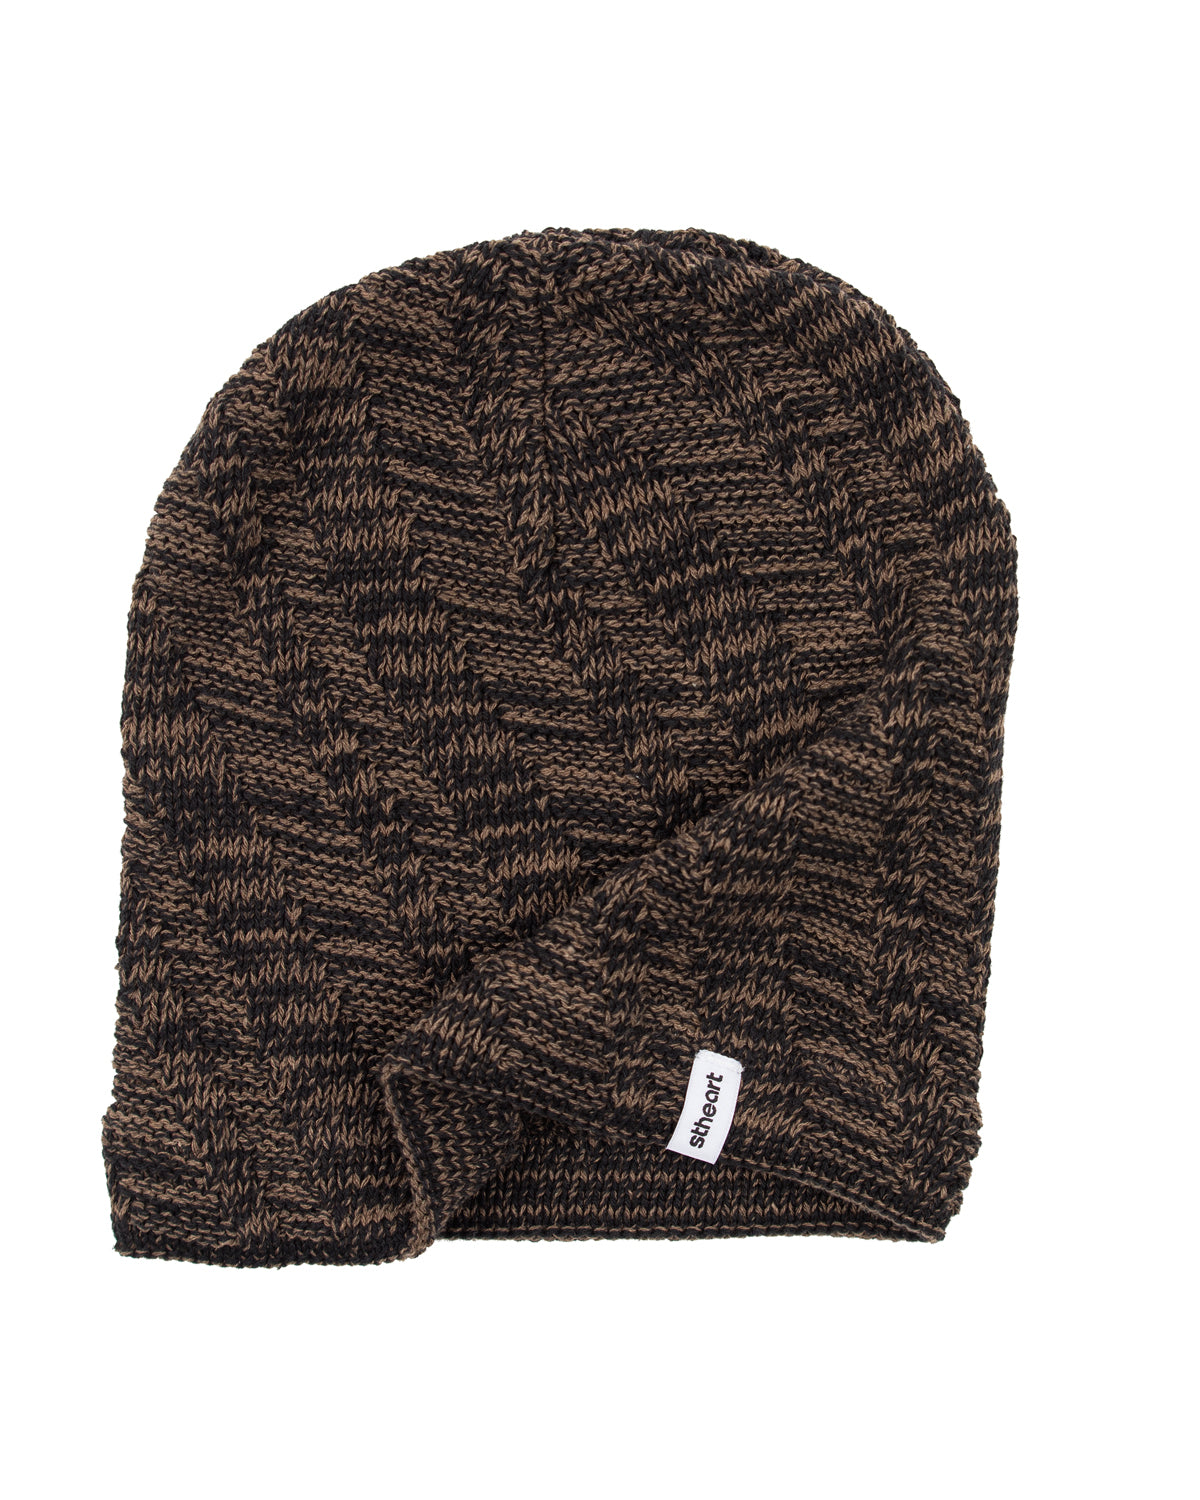 Staircase Slouch Beanie | Brown Onyx